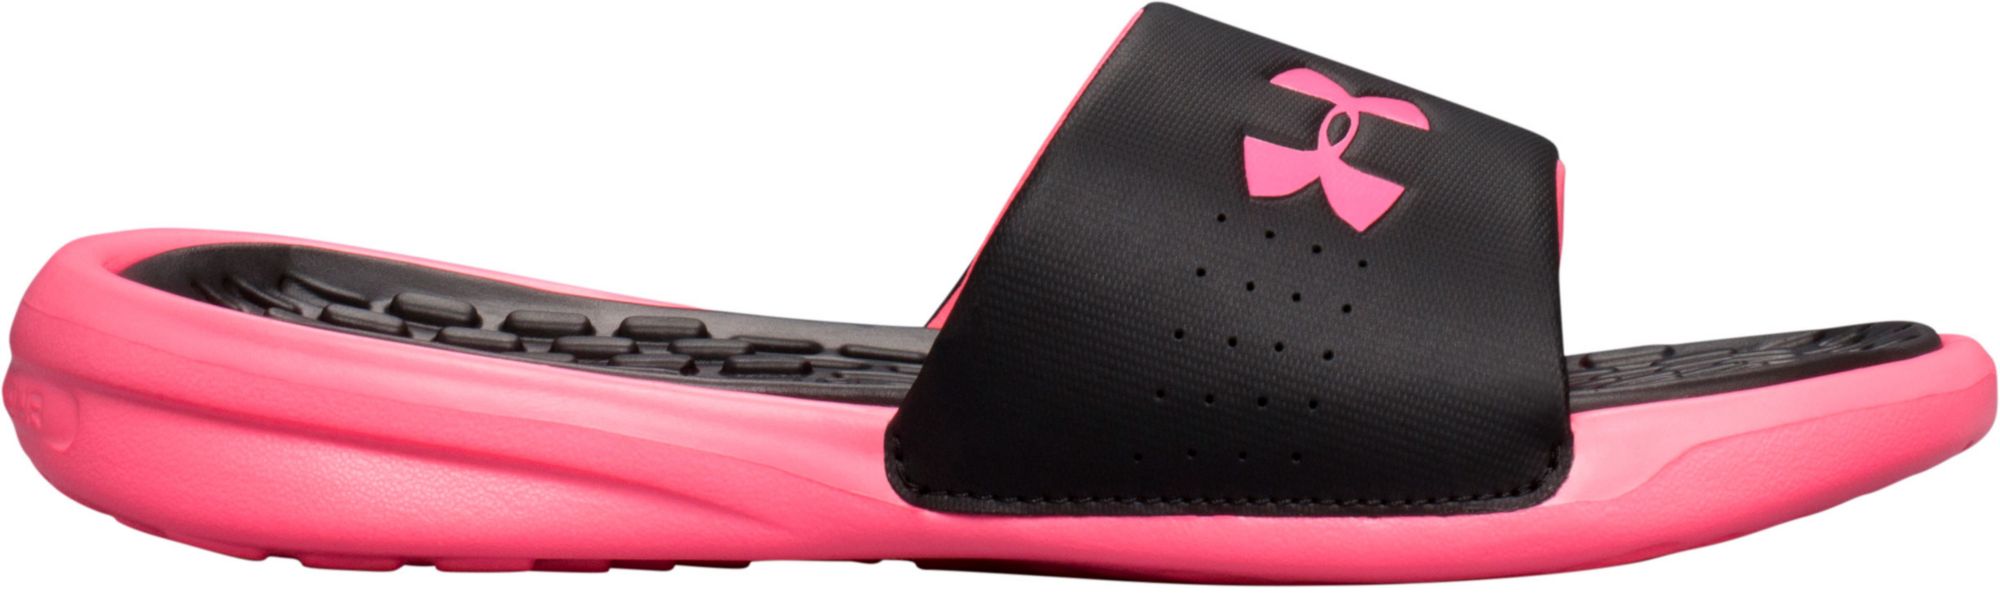 under armour flip flops youth